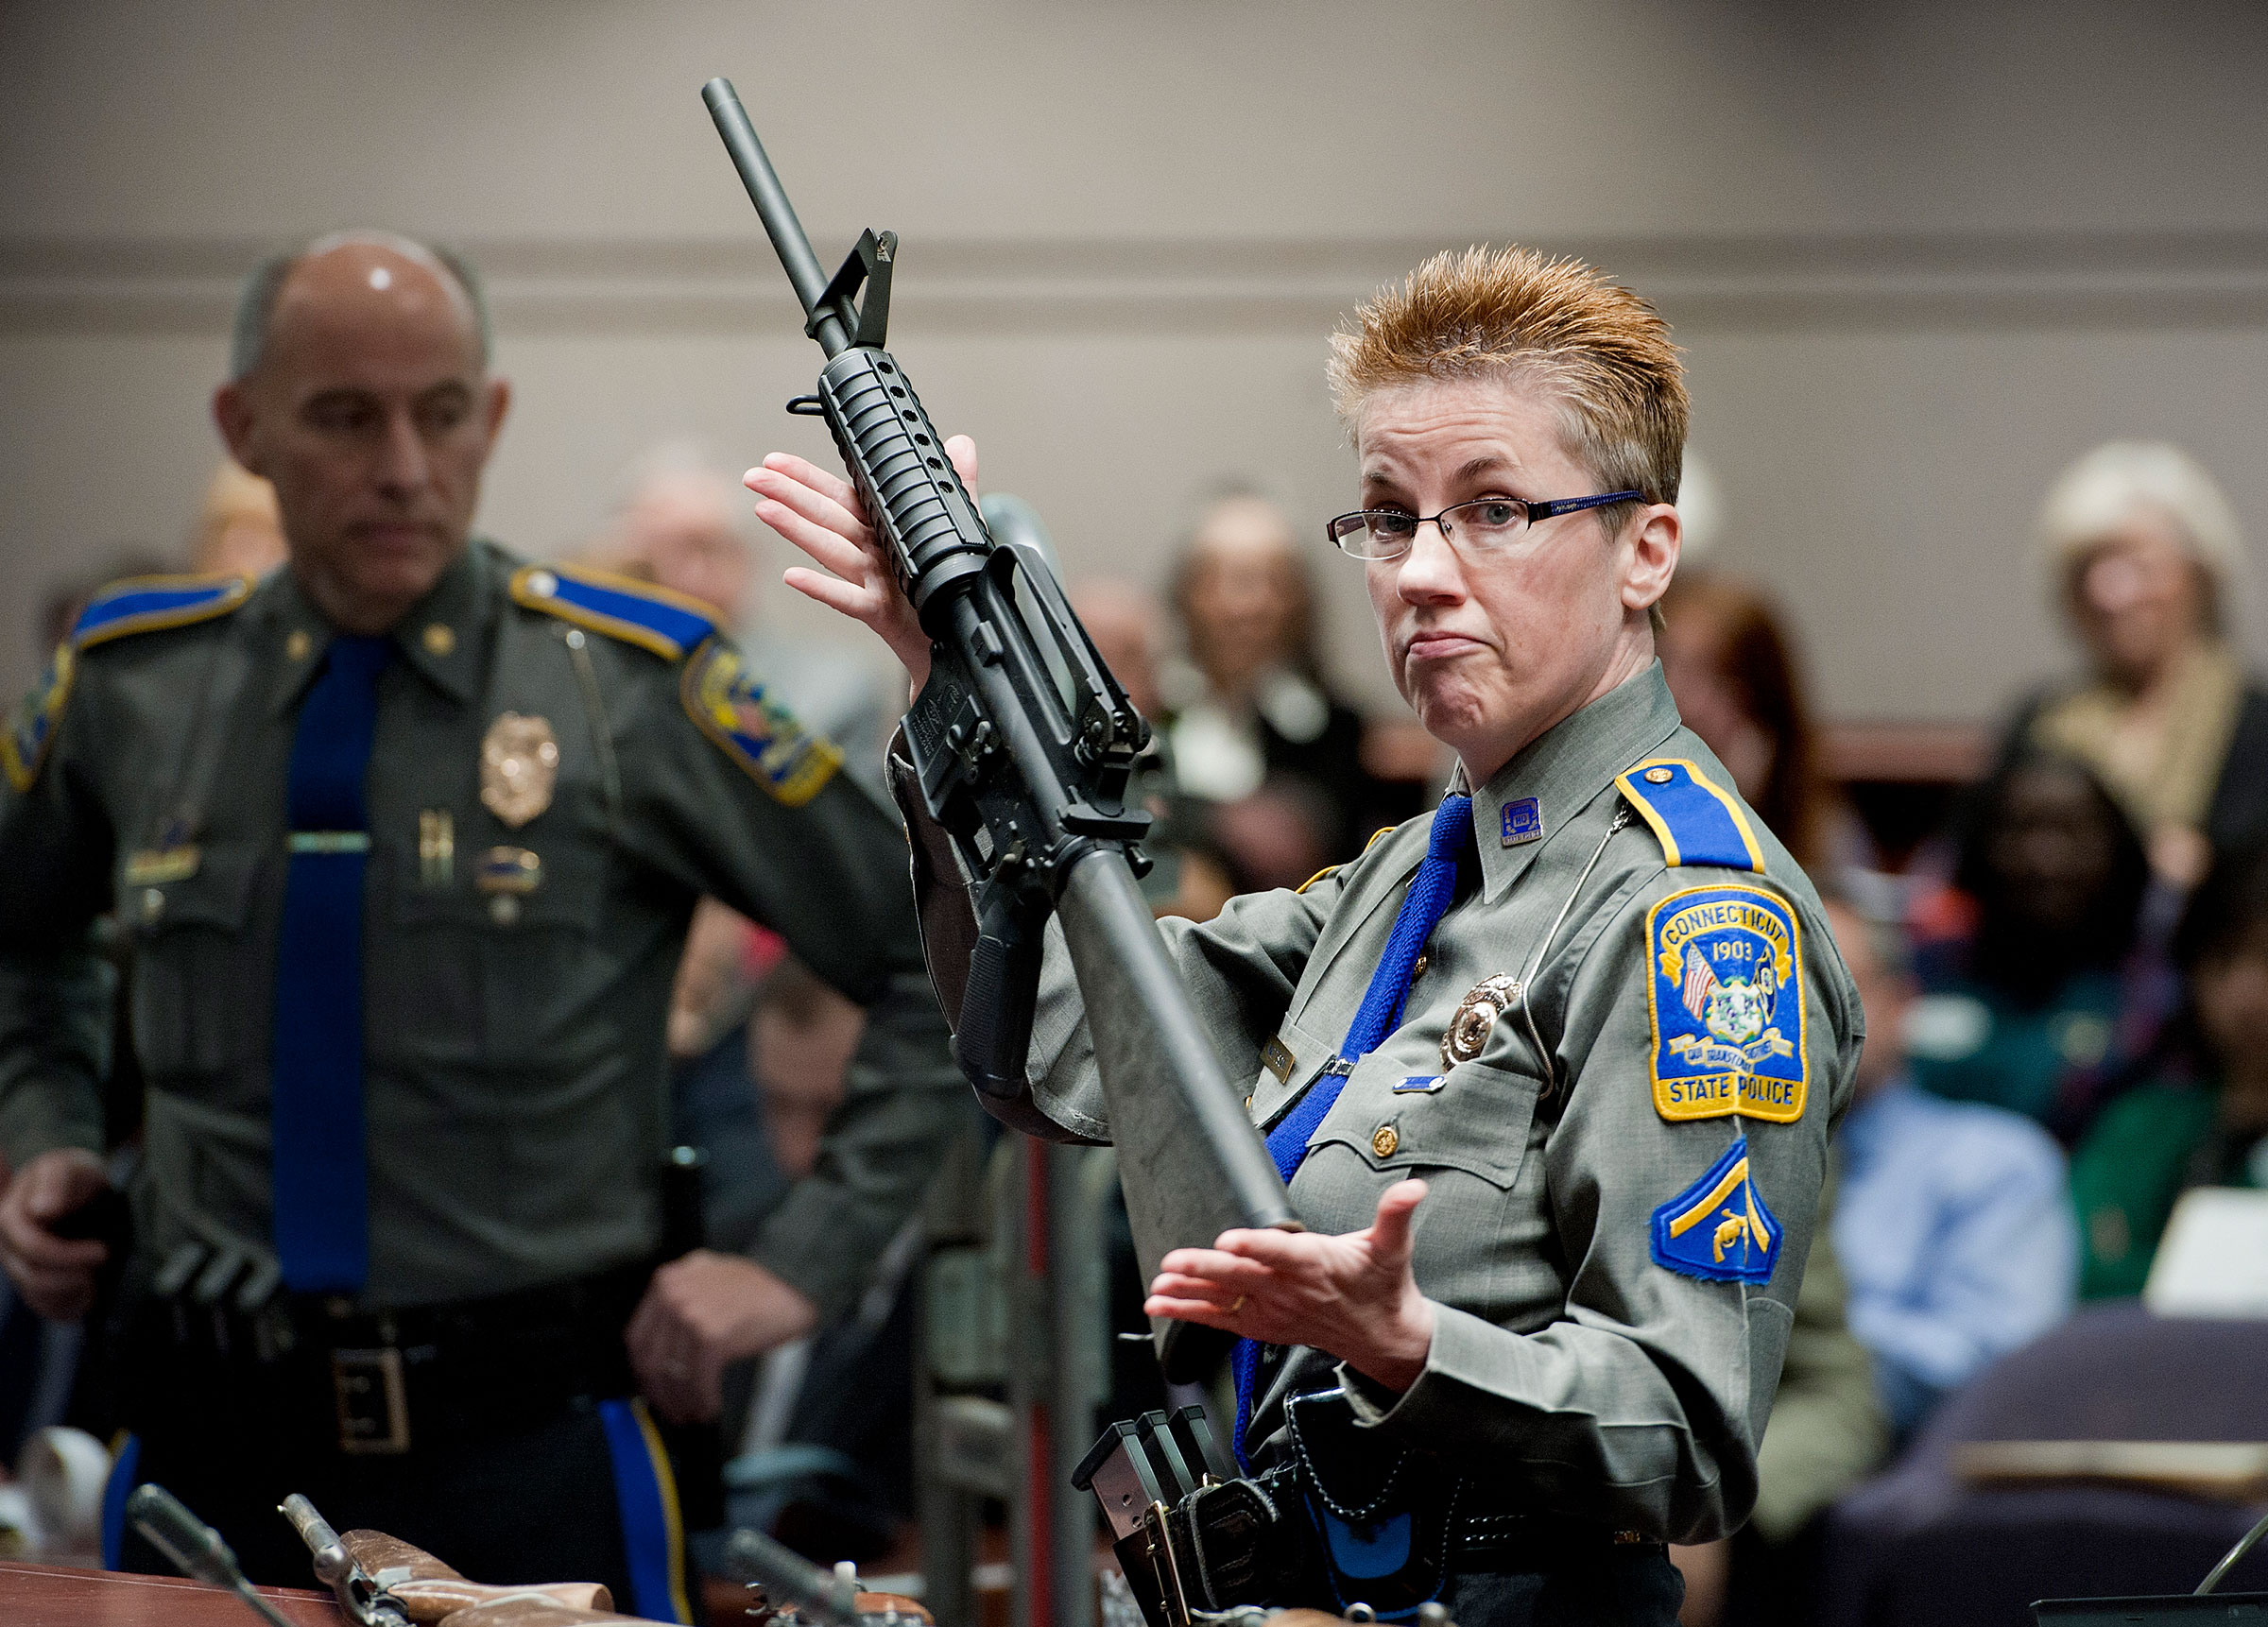 Firearms Training Unit Detective Barbara J. Mattson of the Connecticut State Police holds up a Bushmaster AR-15 rifle, the make and model of gun used in the 2012 Sandy Hook shooting, for a demonstration during a hearing of a legislative subcommittee reviewing gun laws, in Hartford, Conn., on Jan. 28, 2013. (Jessica Hill/AP)